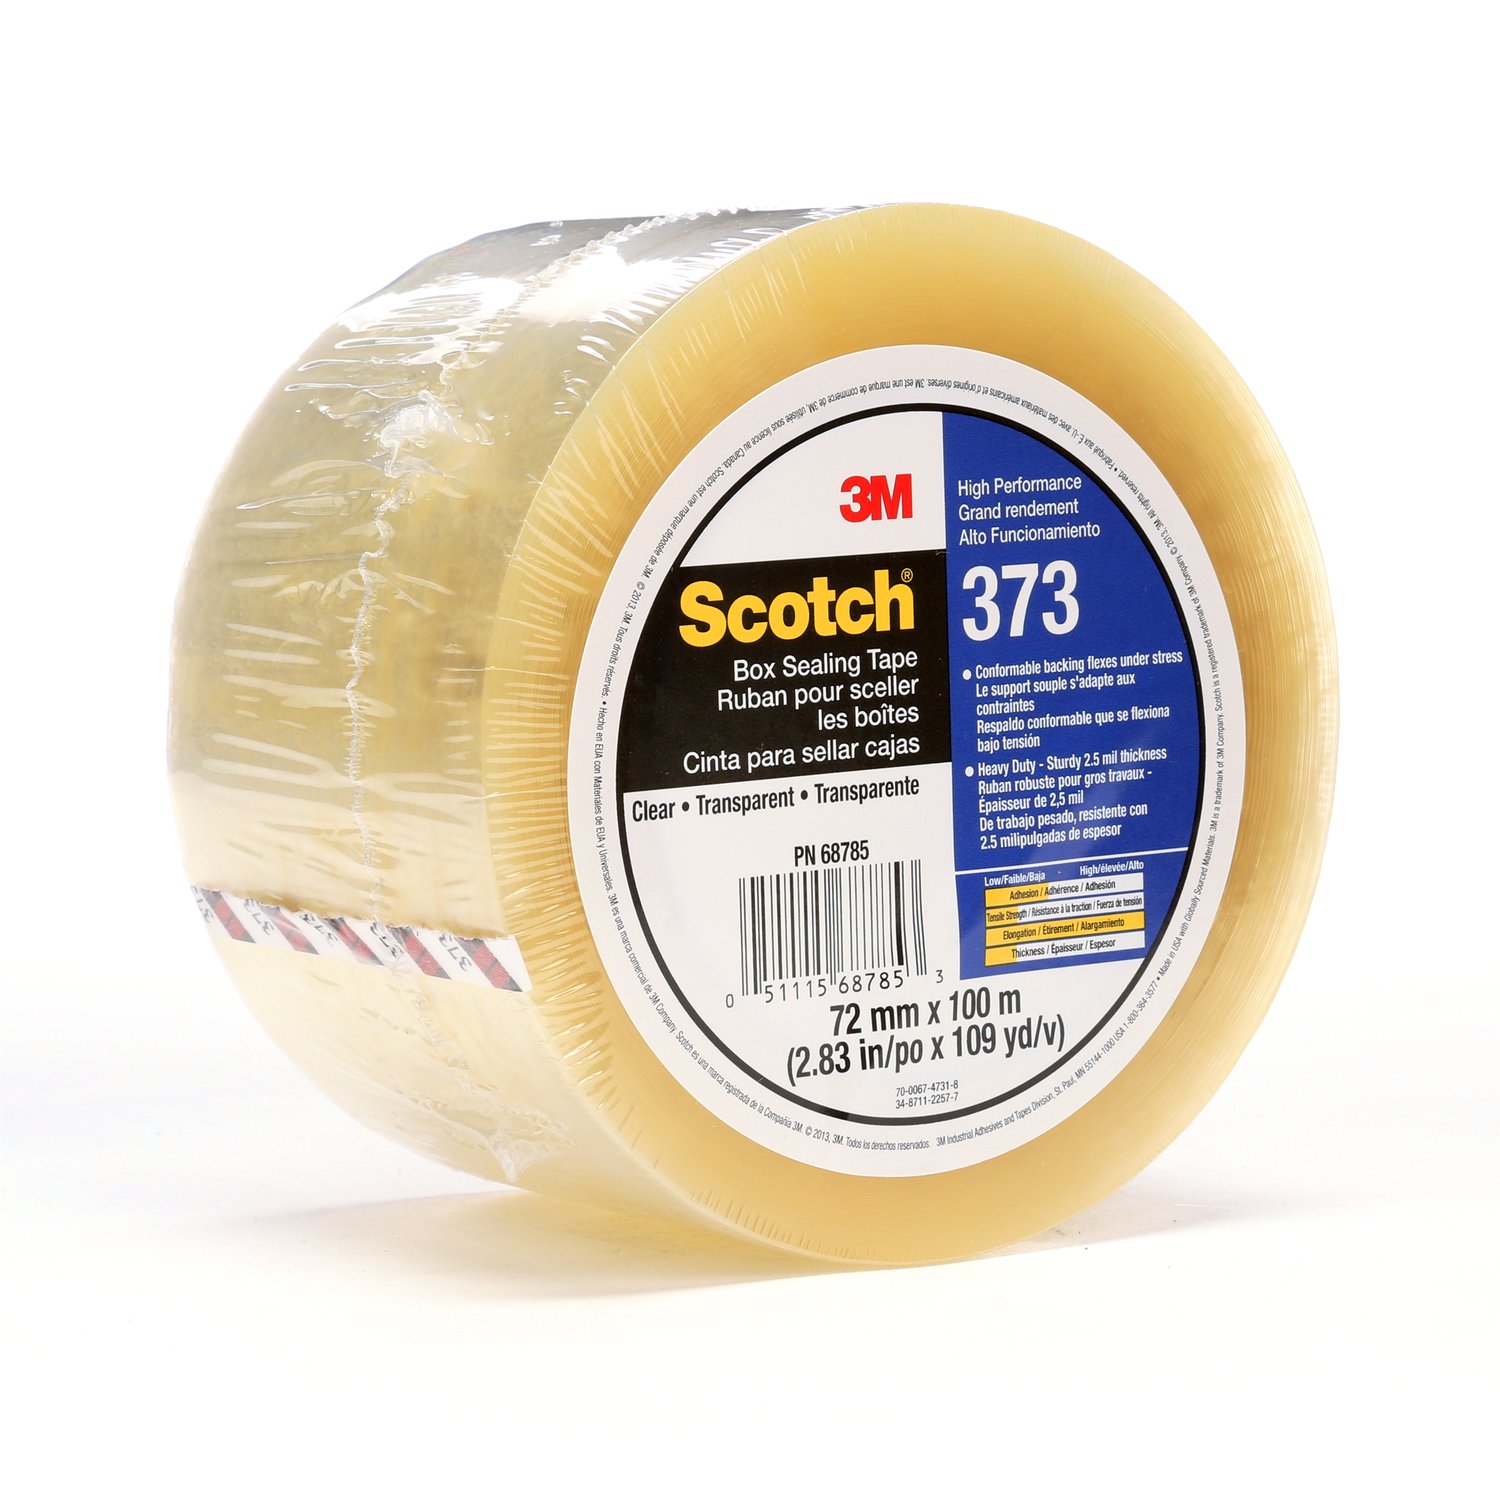 7010335125 - Scotch Box Sealing Tape 373, Clear, 72 mm x 100 m, 24/Case,
Individually Wrapped Conveniently Packaged